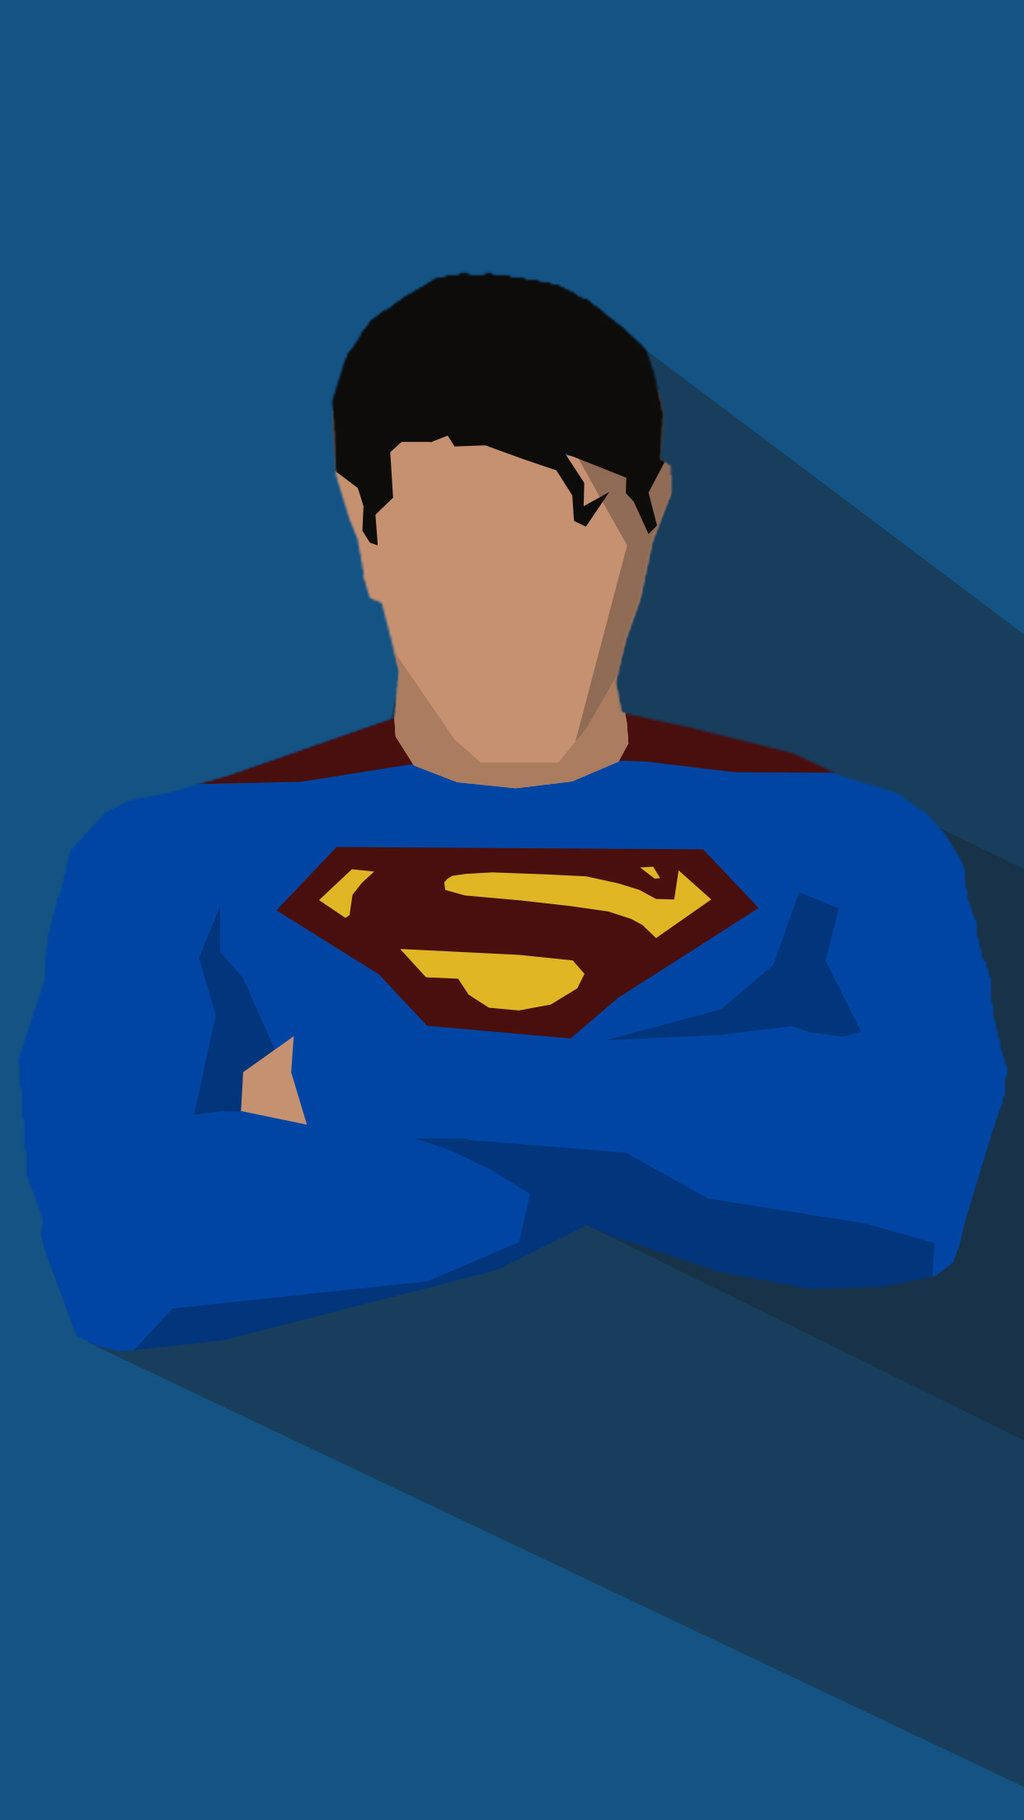 Superman In A Flat Style With Long Shadow Background